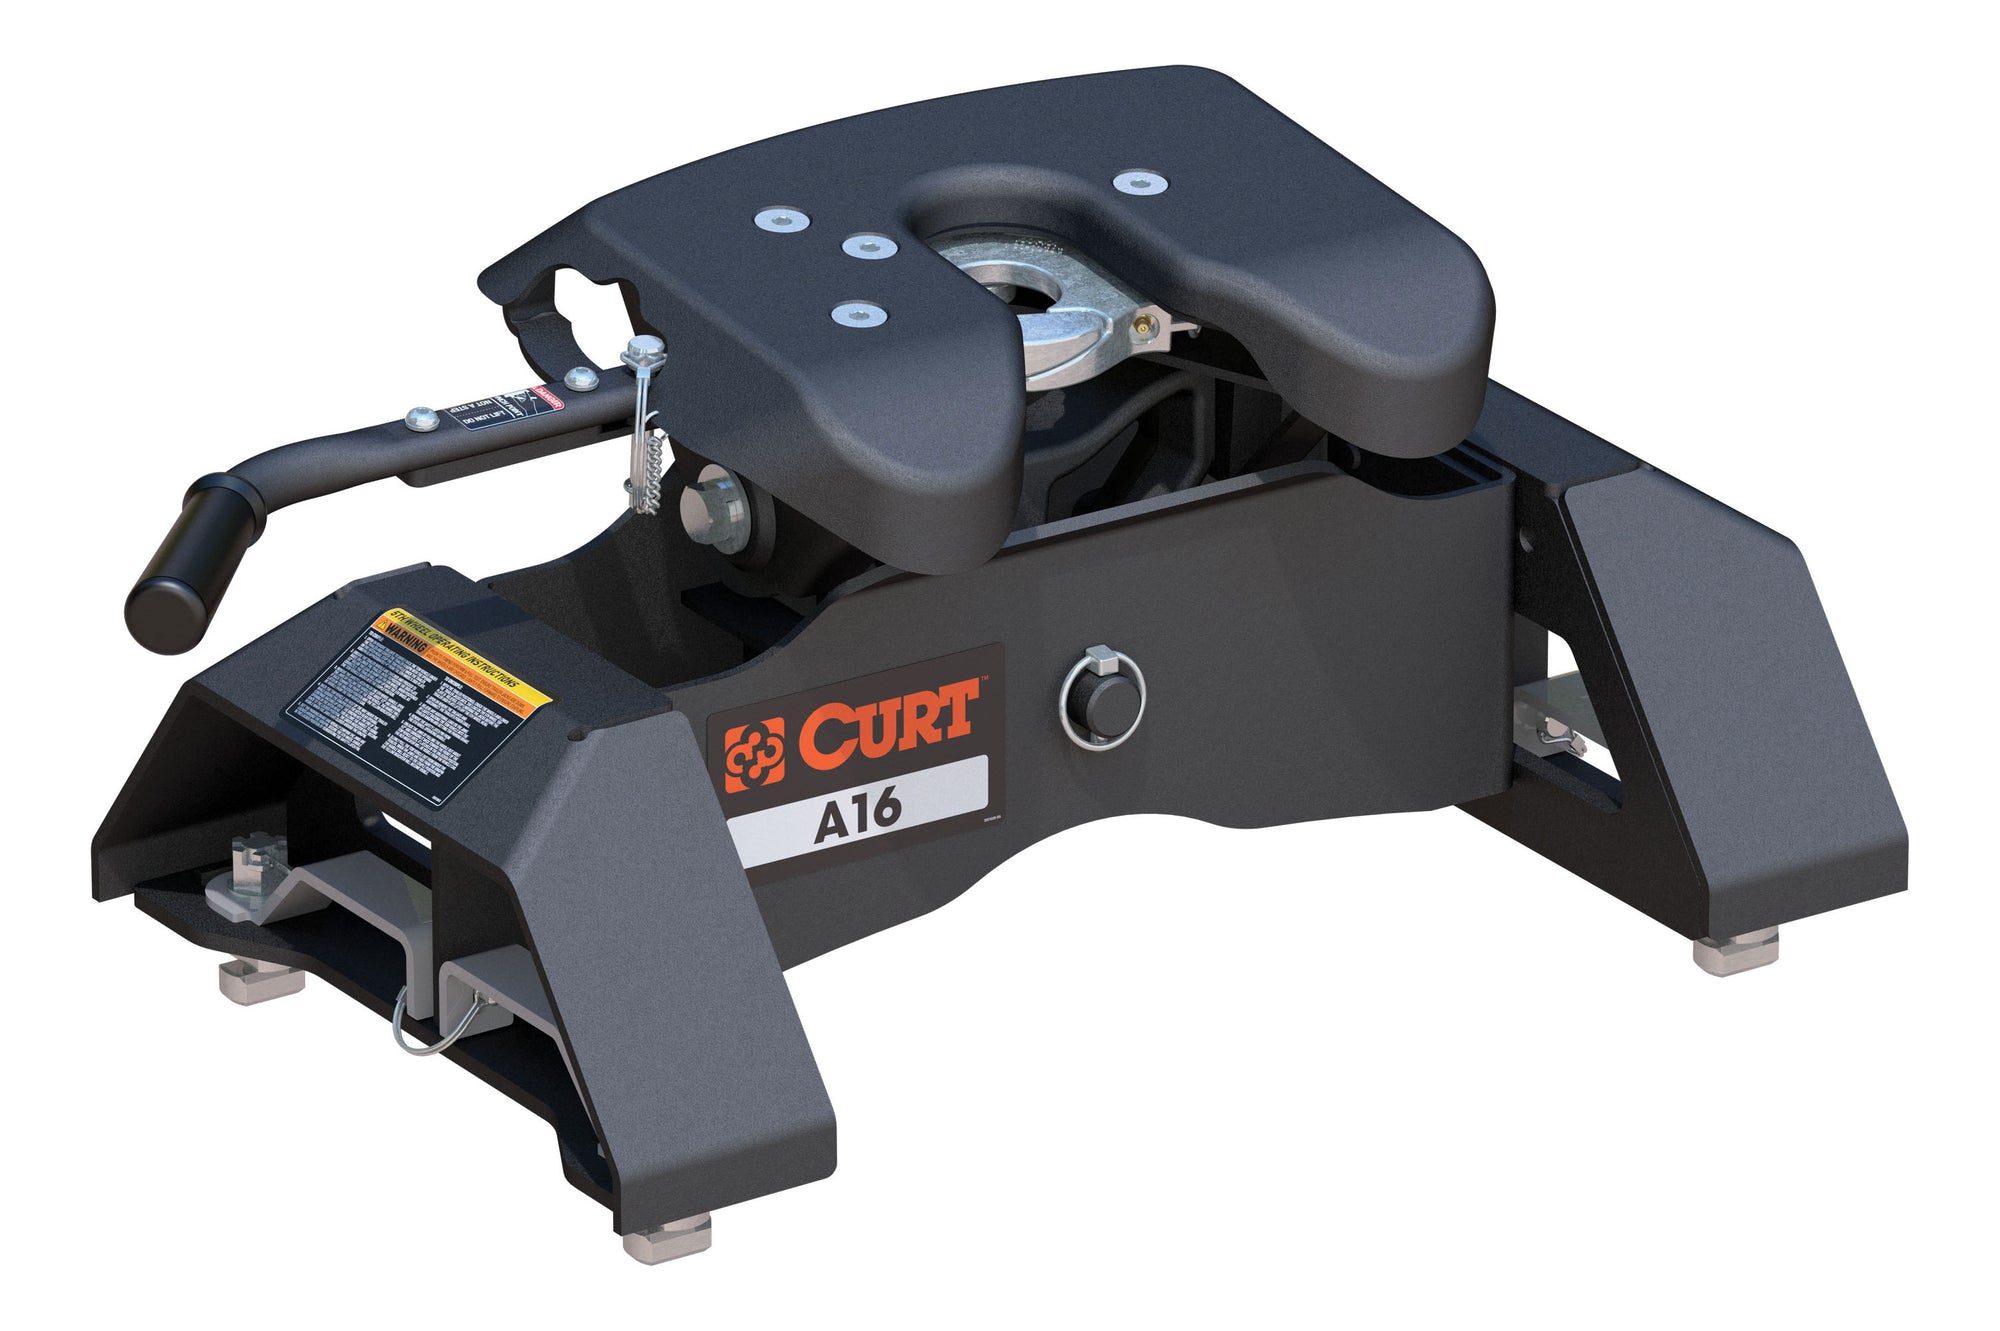 CURT 16091 A16 5th Wheel Hitch for Select Chevrolet Silverado, GMC Sierra 2500, 3500 HD, 8' Bed Puck System - 16,000 lbs.